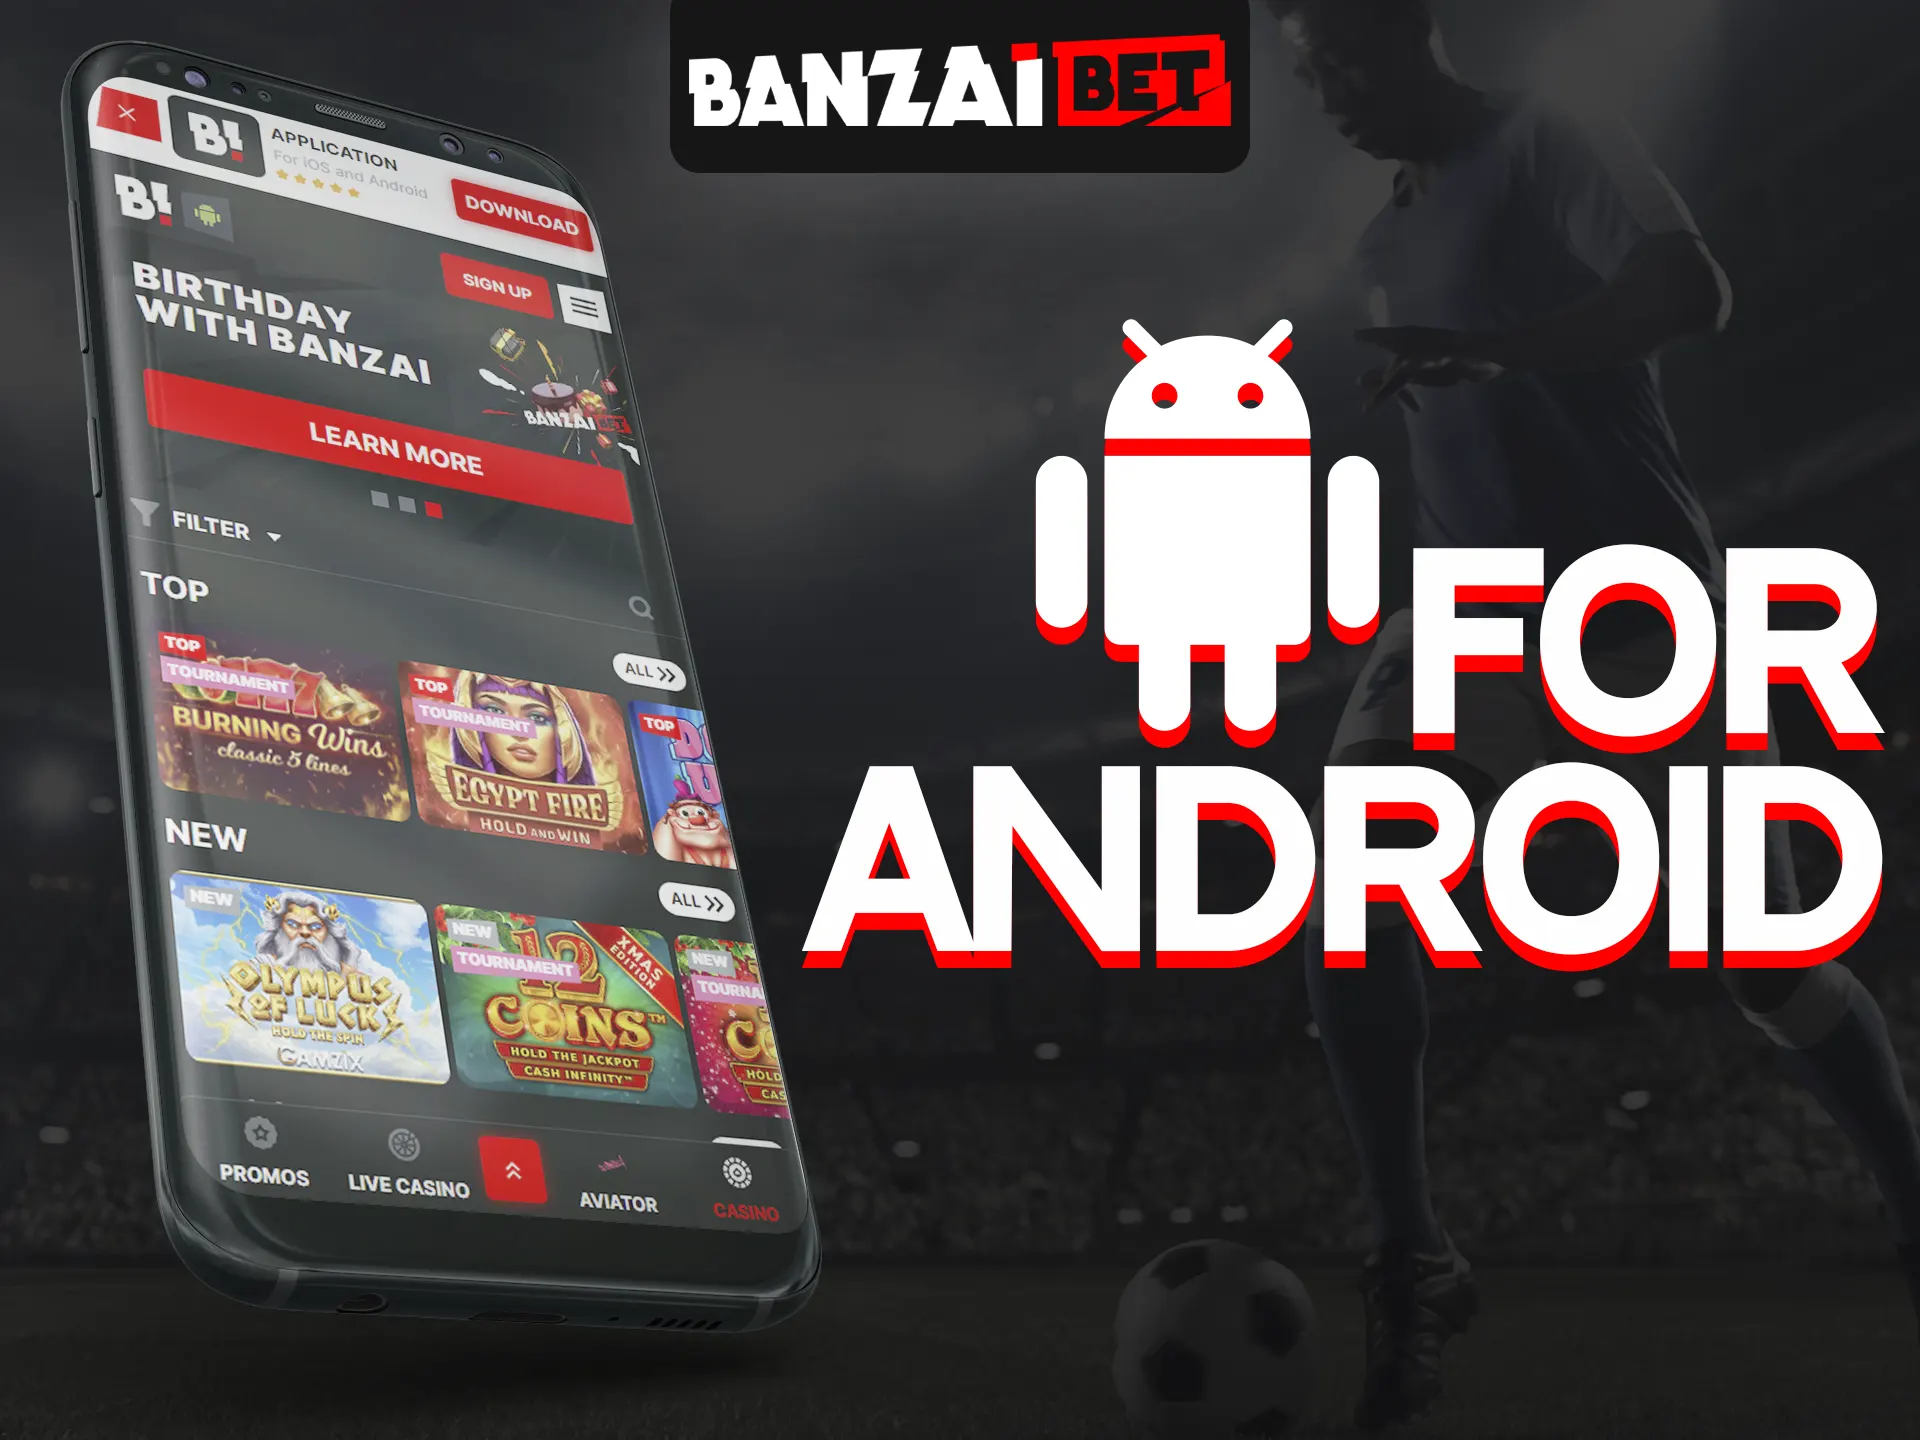 Install the Banzai Bet mobile app on your Android device.